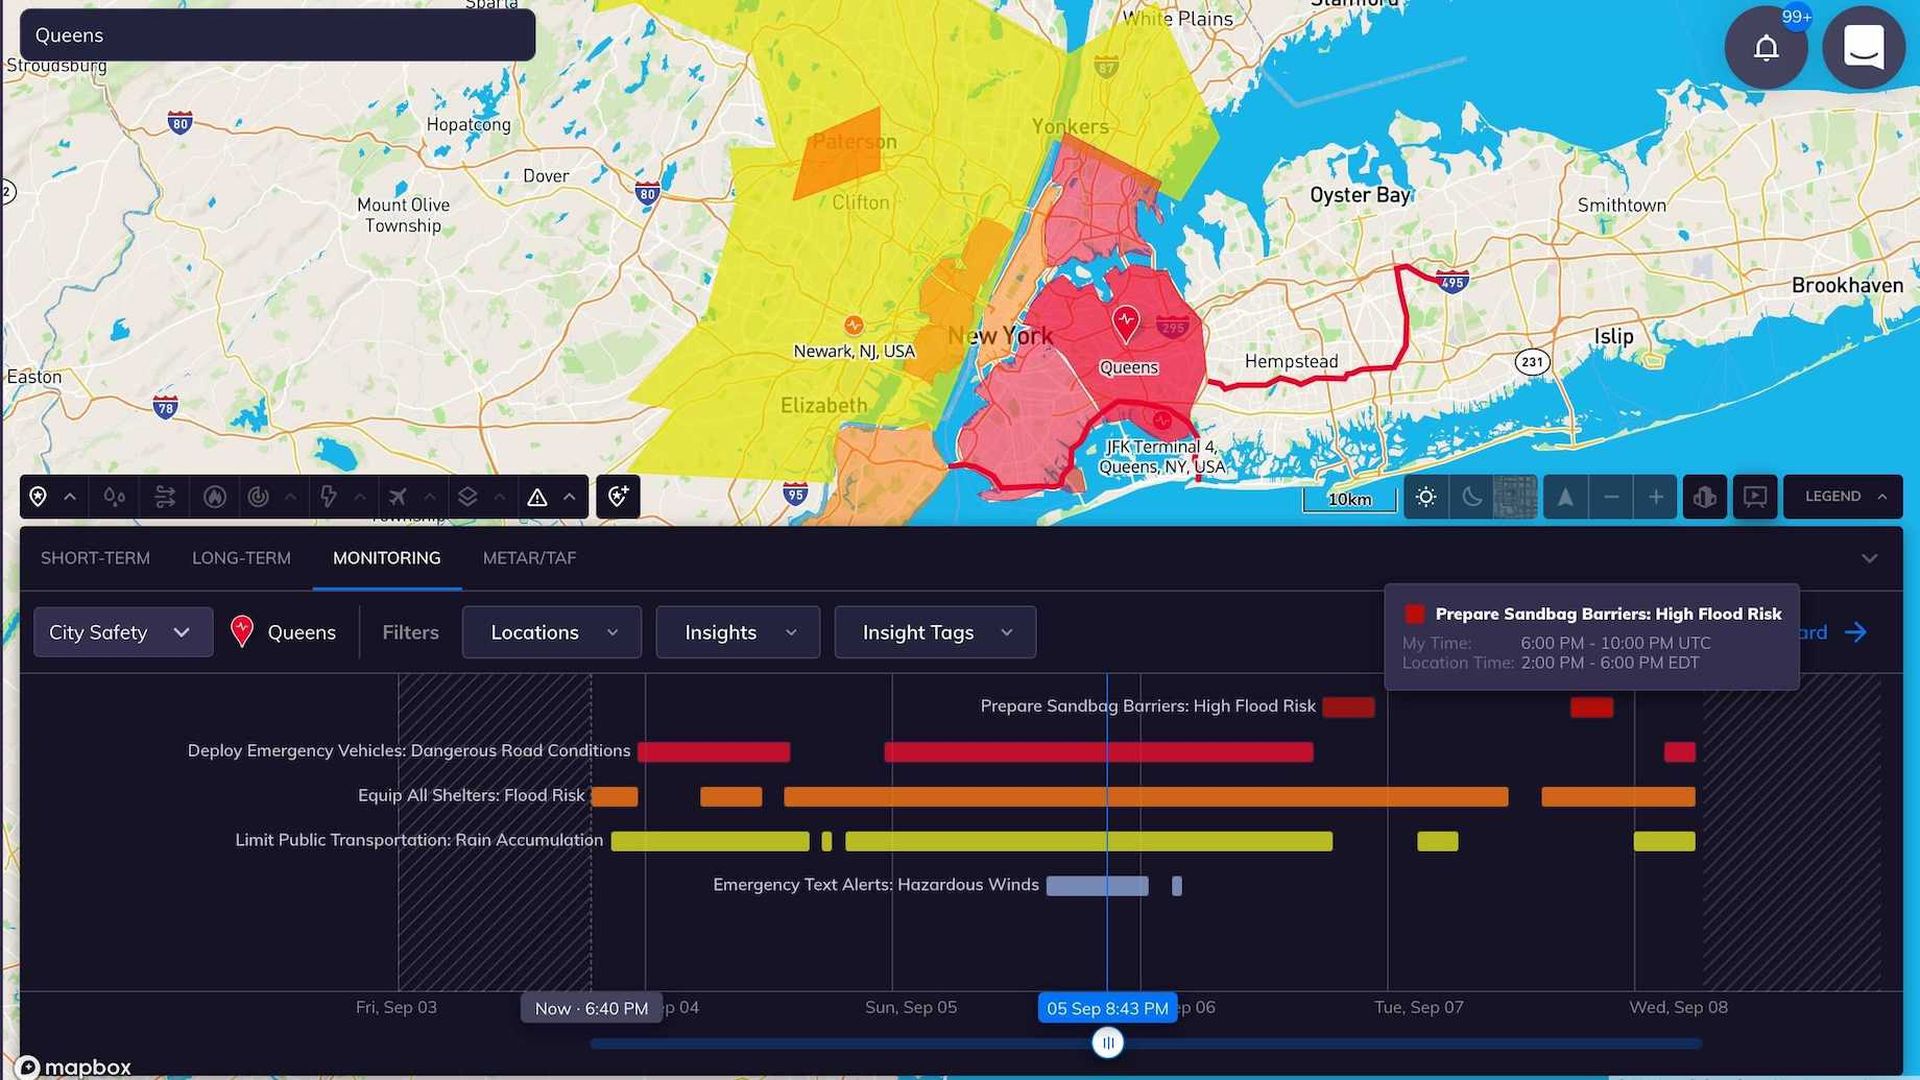 Image of a computer model for predicting floods in New York City.